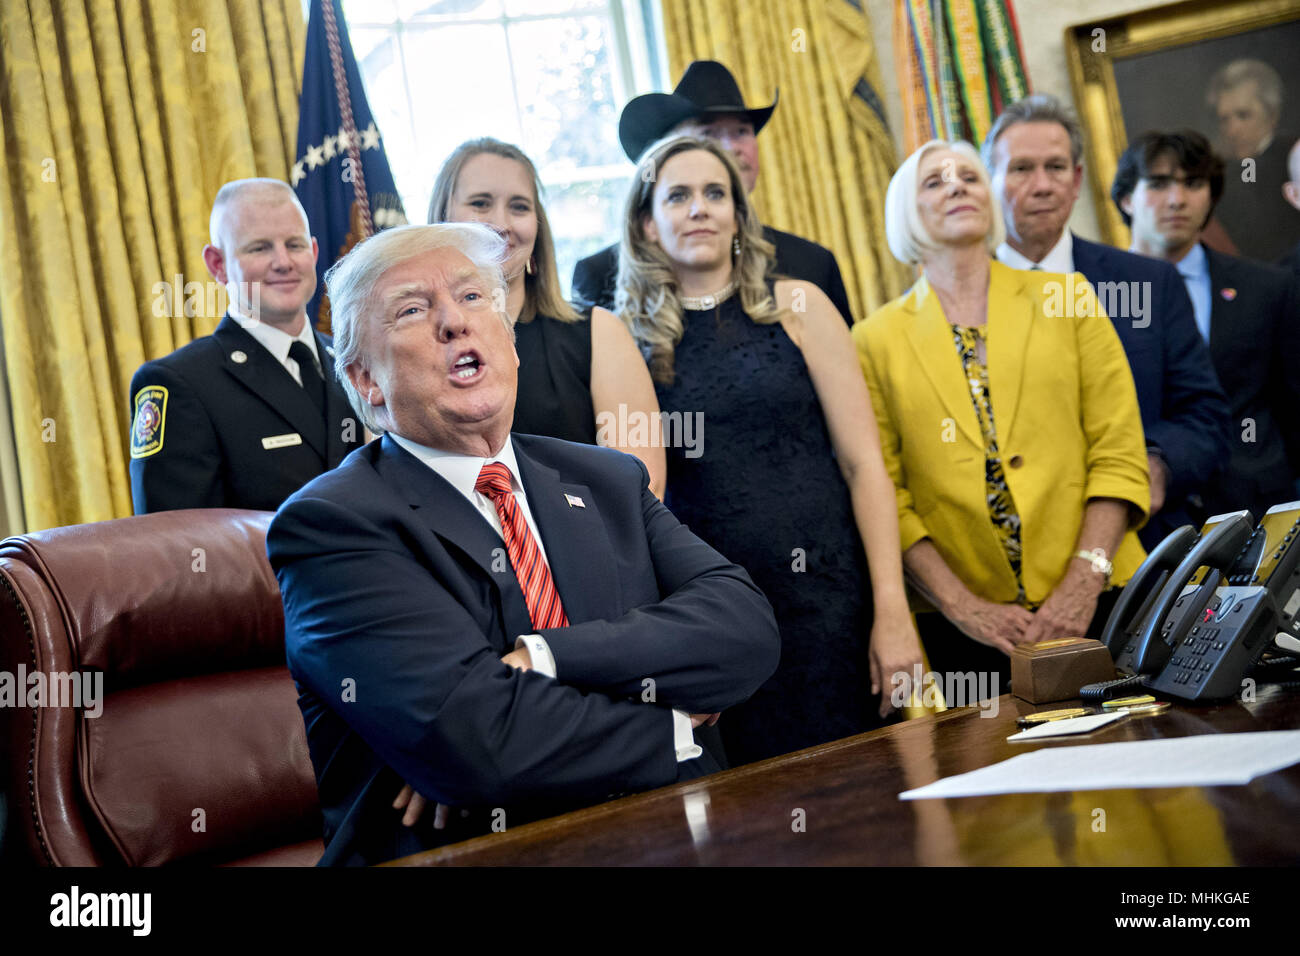 Washington, DC, USA. 1st May, 2018. United States President Donald Trump responds to a question while meeting with the crew and passengers of Southwest Airlines Co. flight 1380 in the Oval Office of the White House in Washington, DC, U.S., on Tuesday, May 1, 2018. An engine on Southwest's flight 1380, a Boeing Co. 737-700 bound for Dallas from New York's LaGuardia airport, exploded and made an emergency landing on April 17 sending shrapnel into the plane and killing a passenger seated near a window. Credit: Andrew Harrer/Pool via CNP | usage worldwide Credit: dpa/Alamy Live News Stock Photo